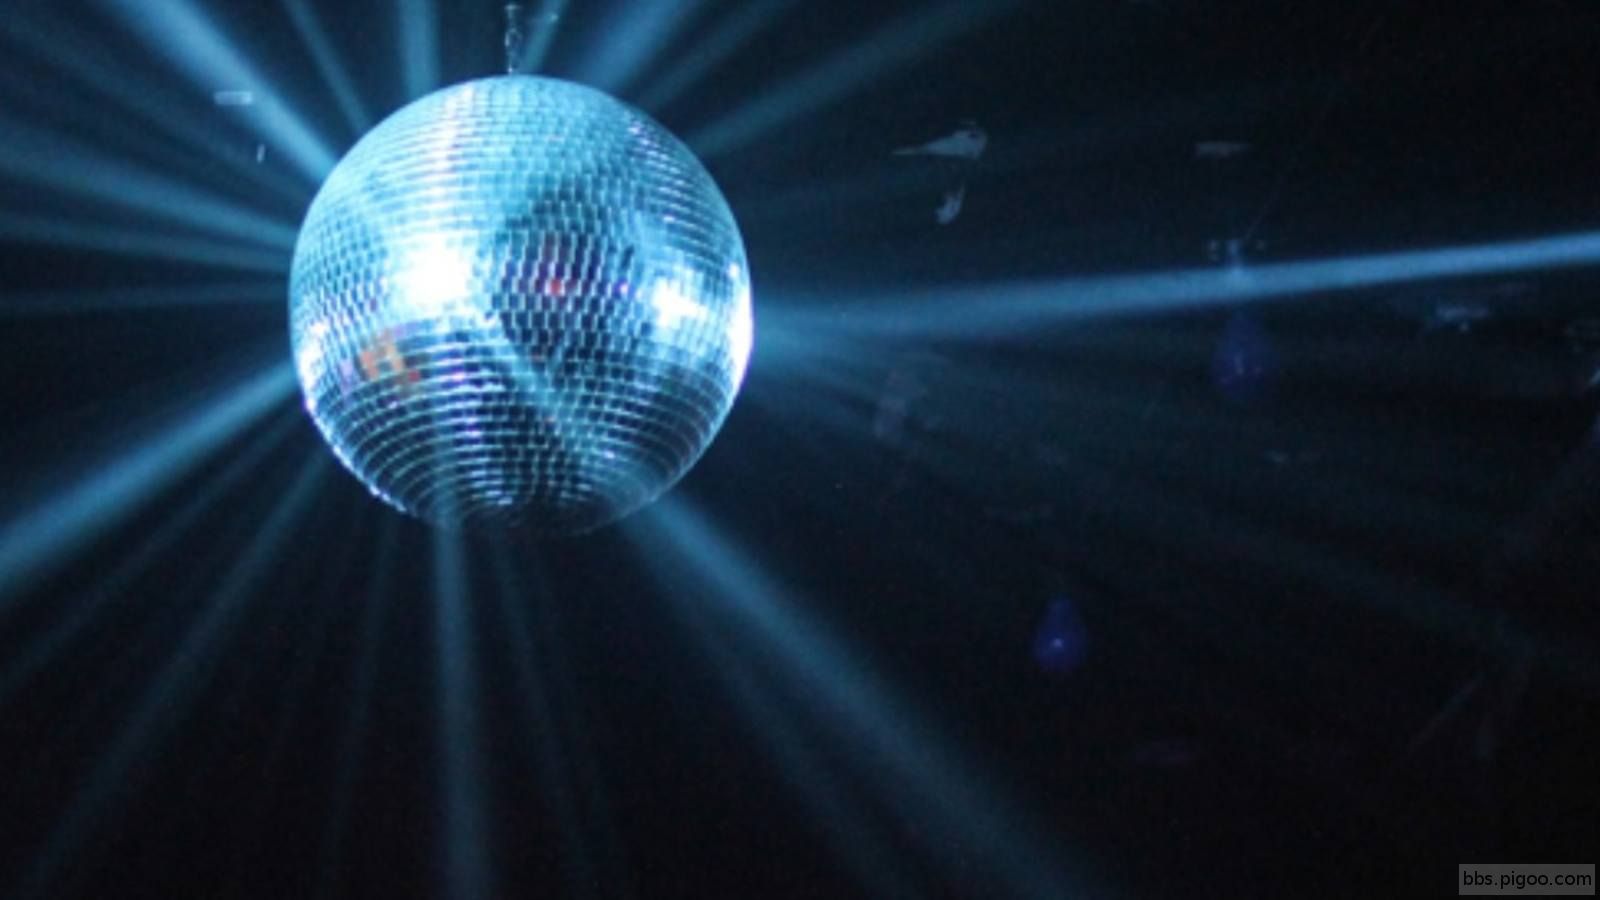 1434597209meet-me-under-the-disco-ball-a-history-of-nightlifes-most-enduring-sym.jpg